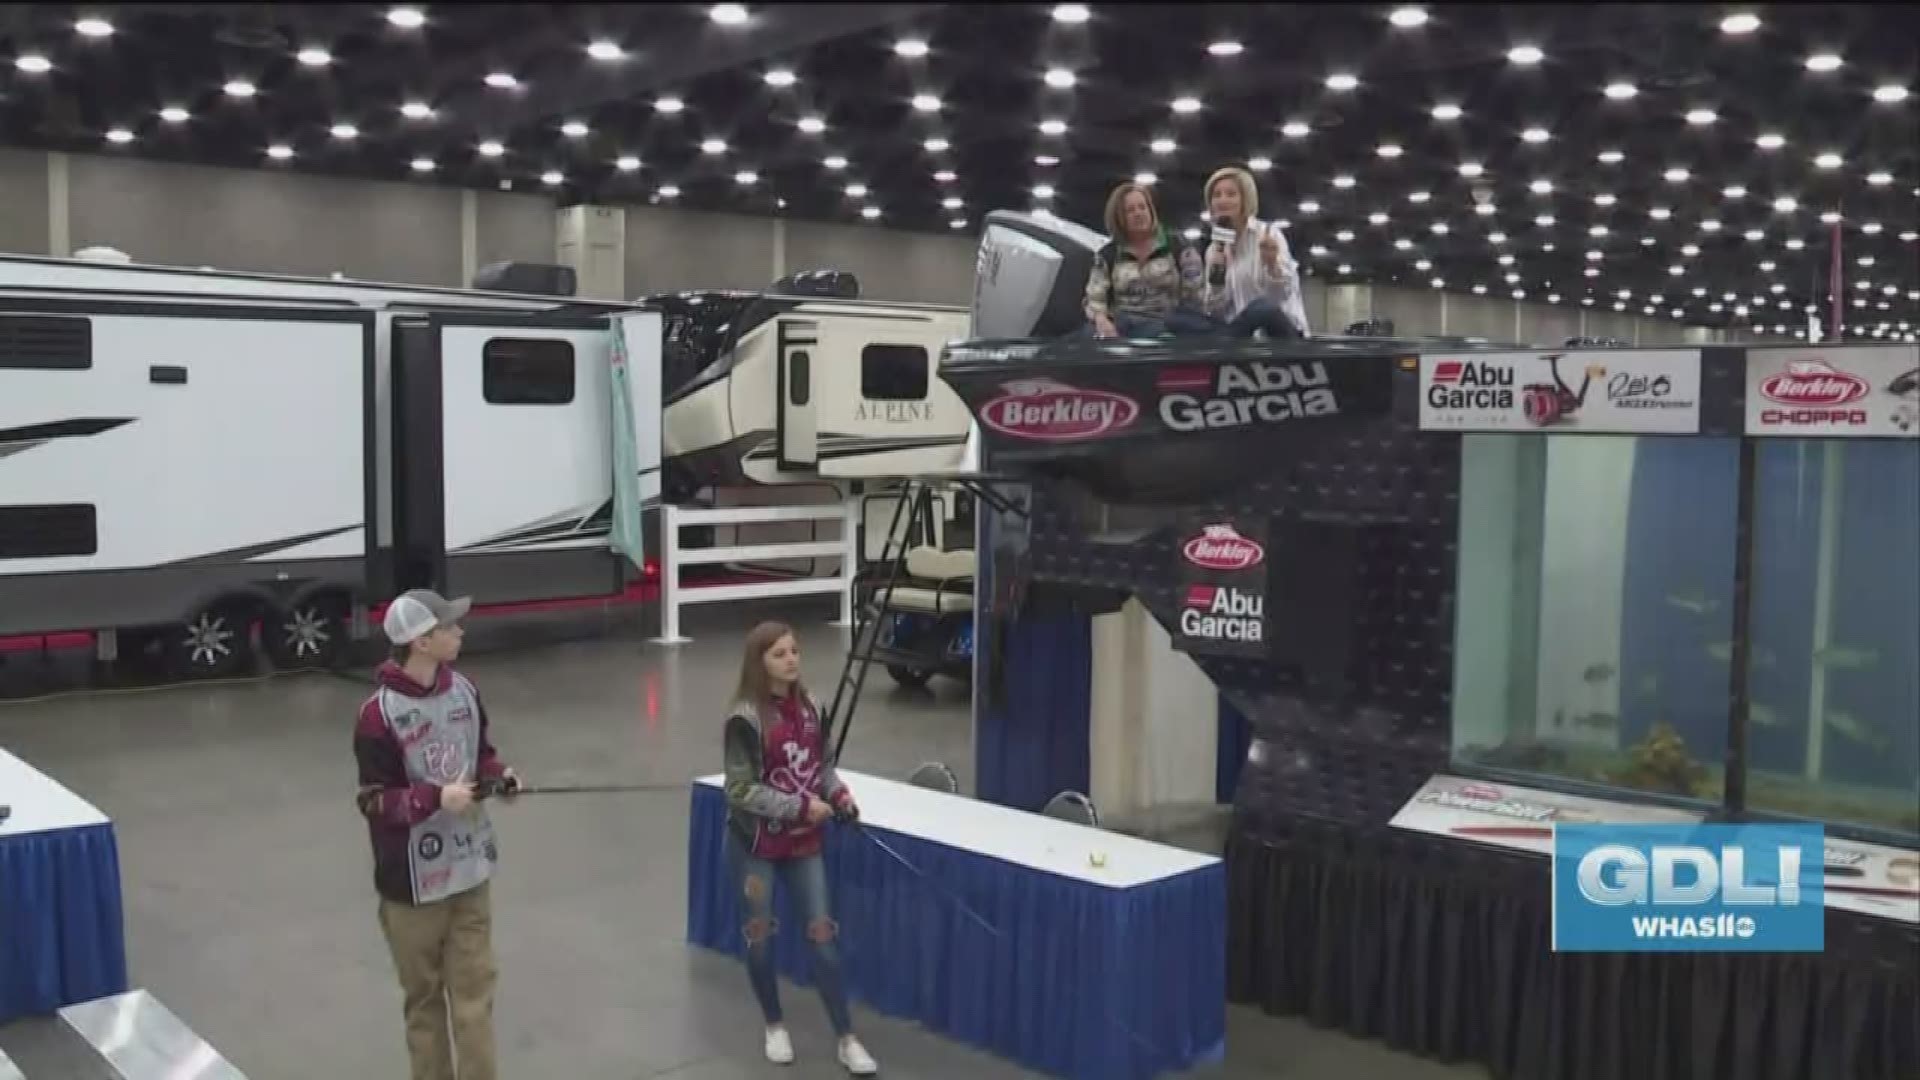 The Louisville Boat, RV & Sportshow is Jan. 22-26 at the Kentucky Expo Center, located at 937 Phillips Lane in Louisville. Go to LouisvilleBoatShow.com for details.